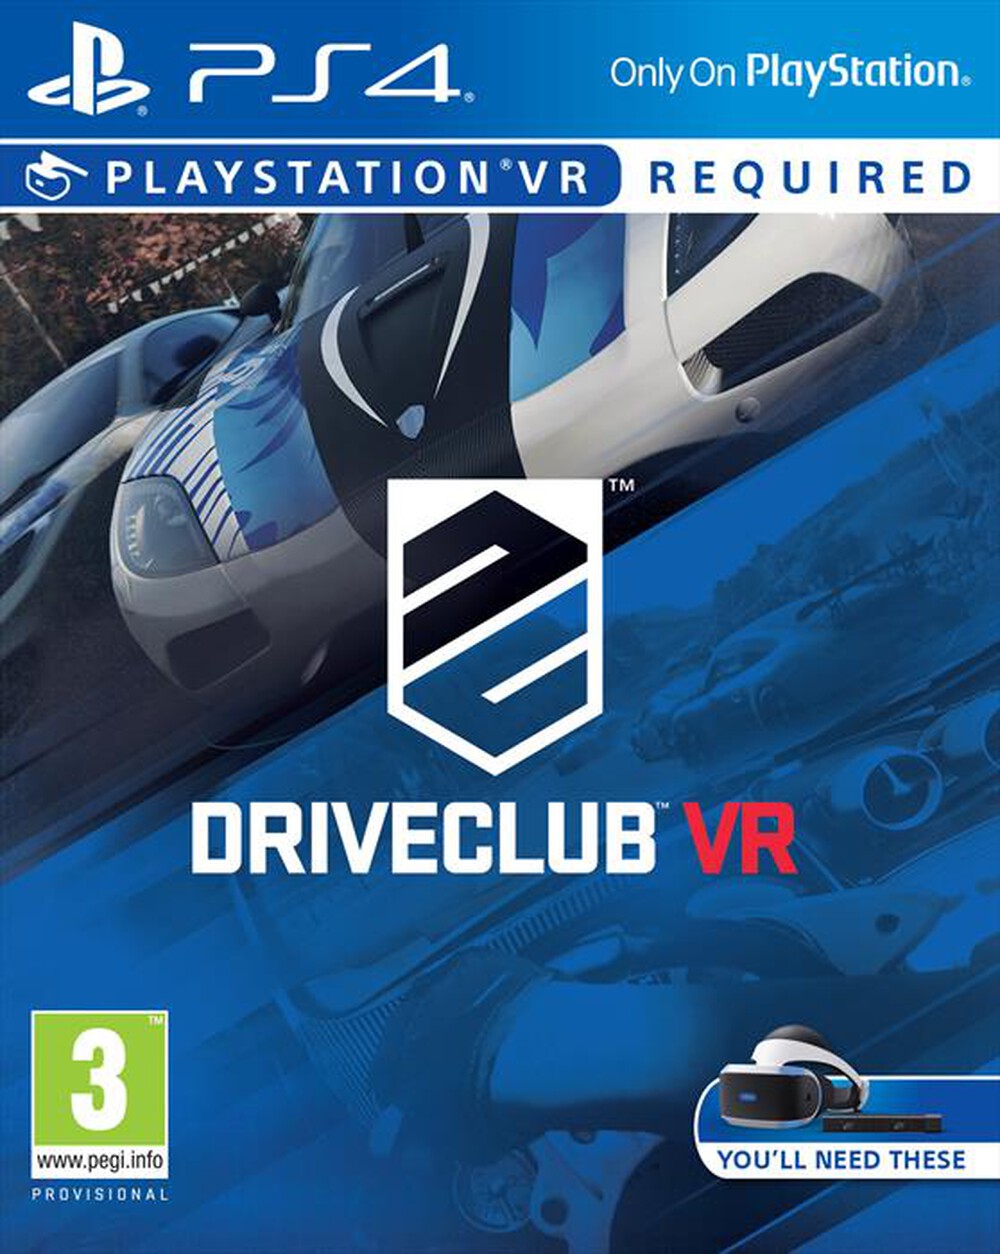 "SONY COMPUTER - Driveclub Playstation VR - "